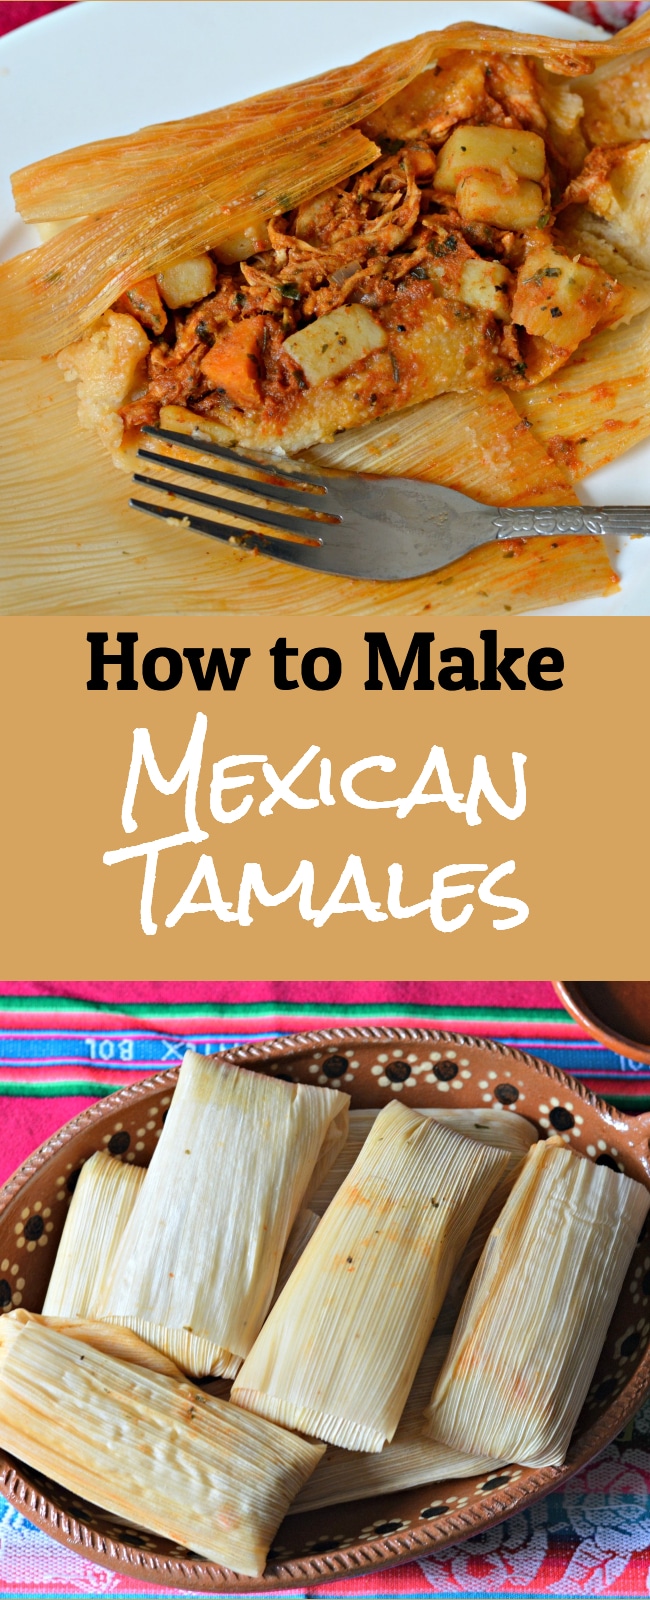 How to Make Authentic Mexican Tamales - My Latina Table